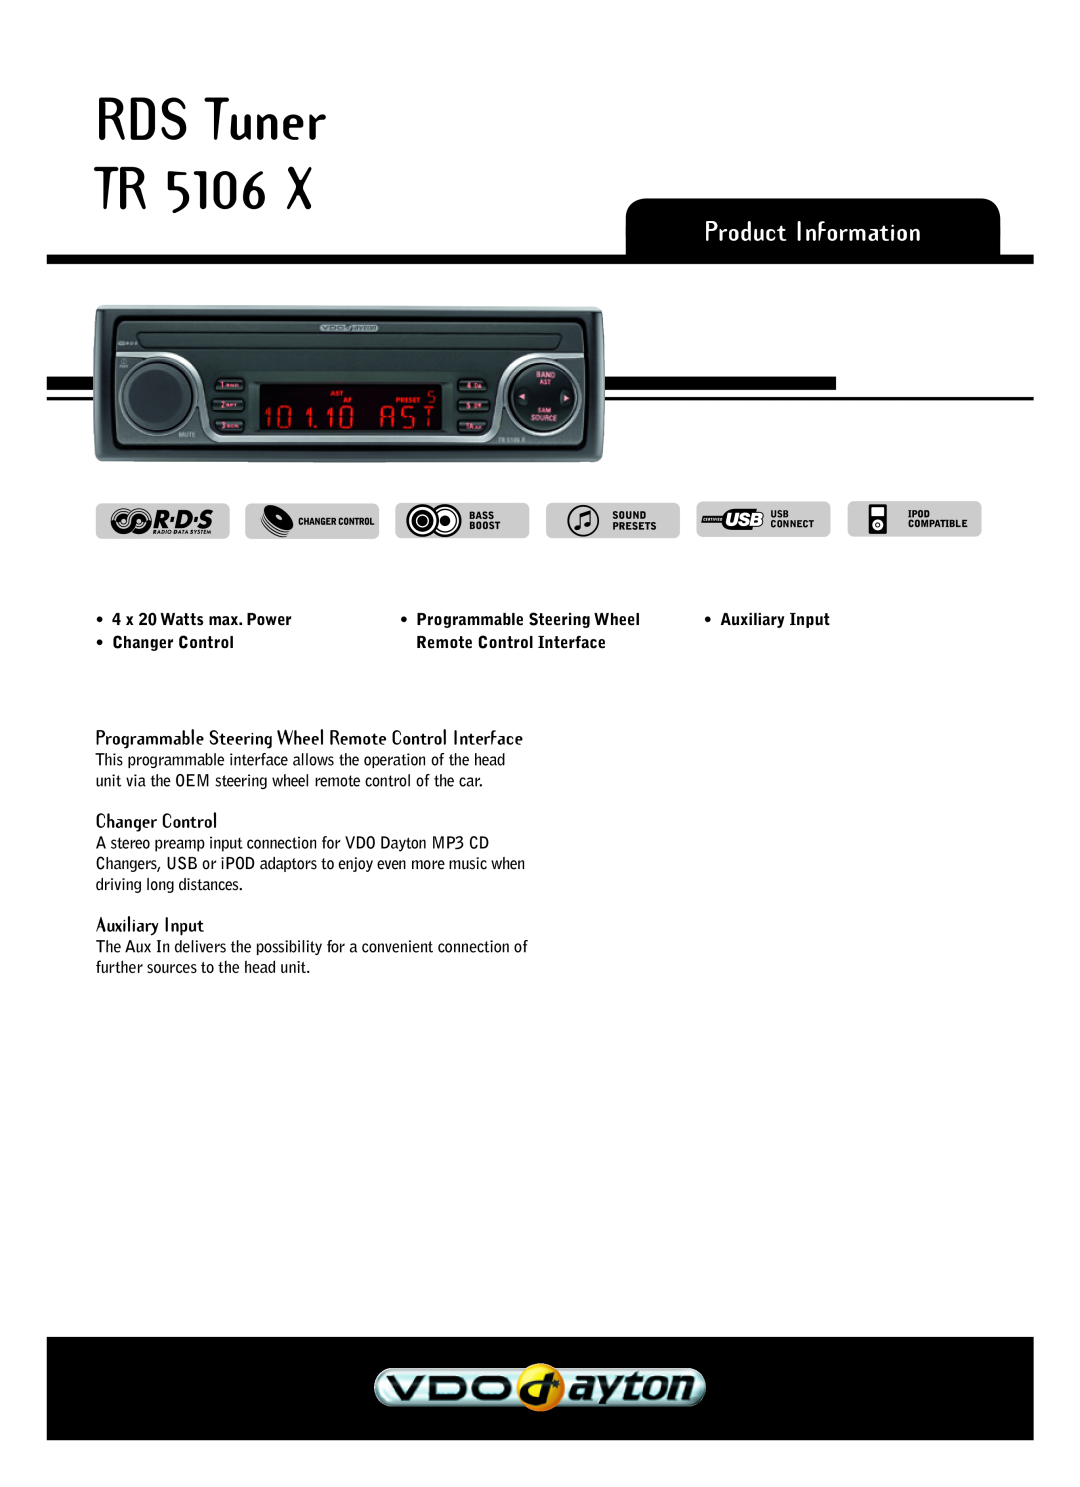 VDO Dayton TR 5106 X manual RDS Tuner TR, Product Information, Changer Control, Auxiliary Input 